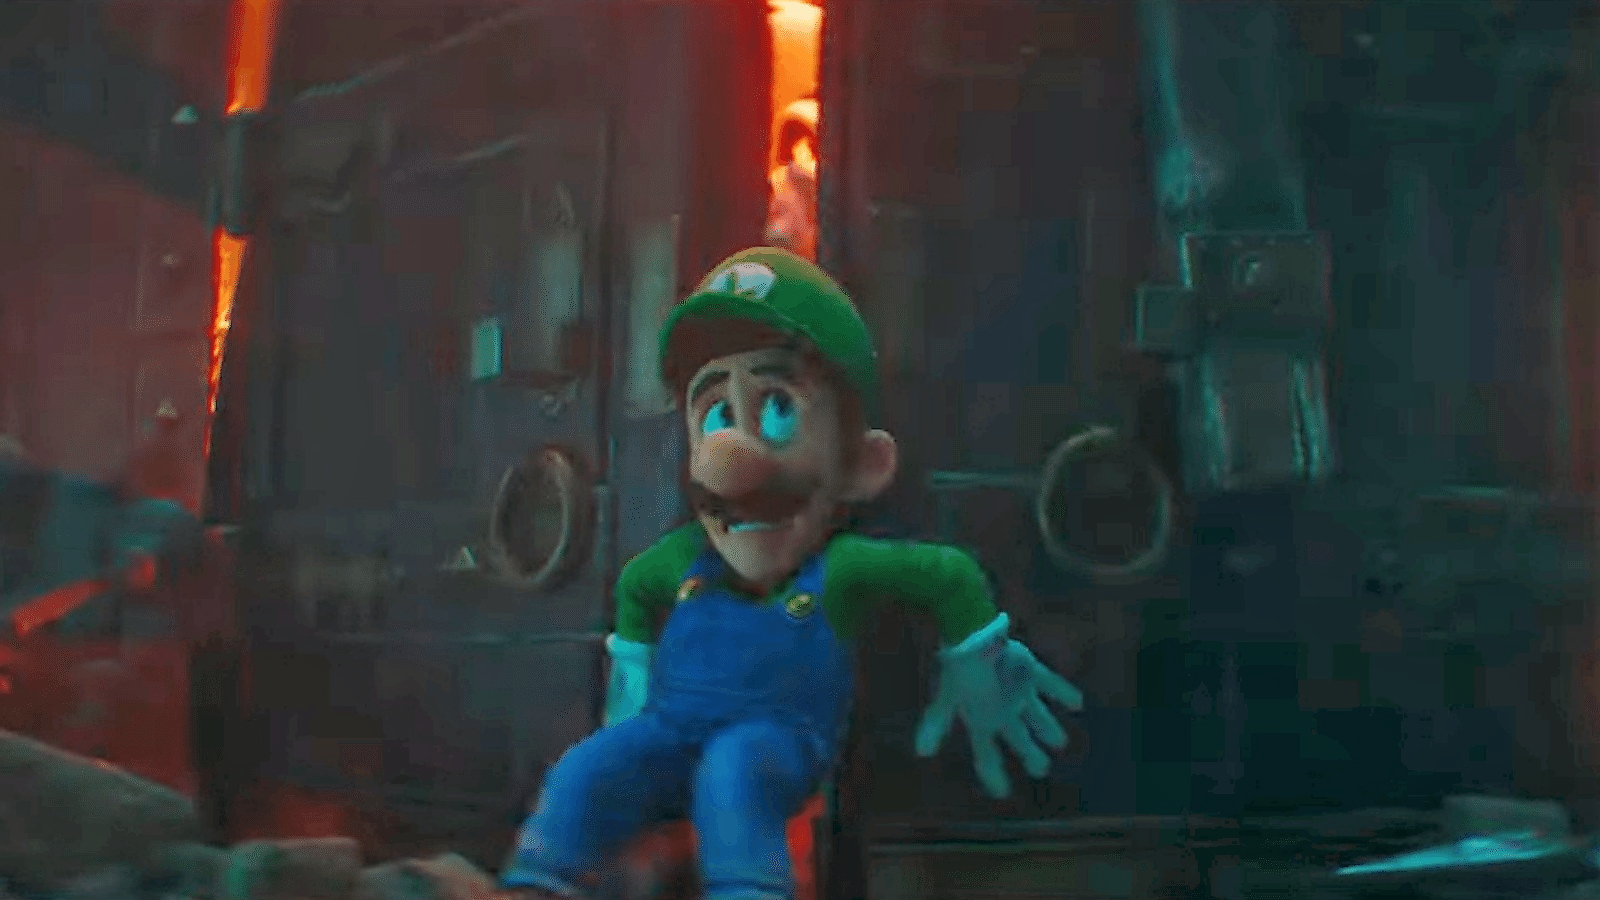 Luigi is played by Charlie Day